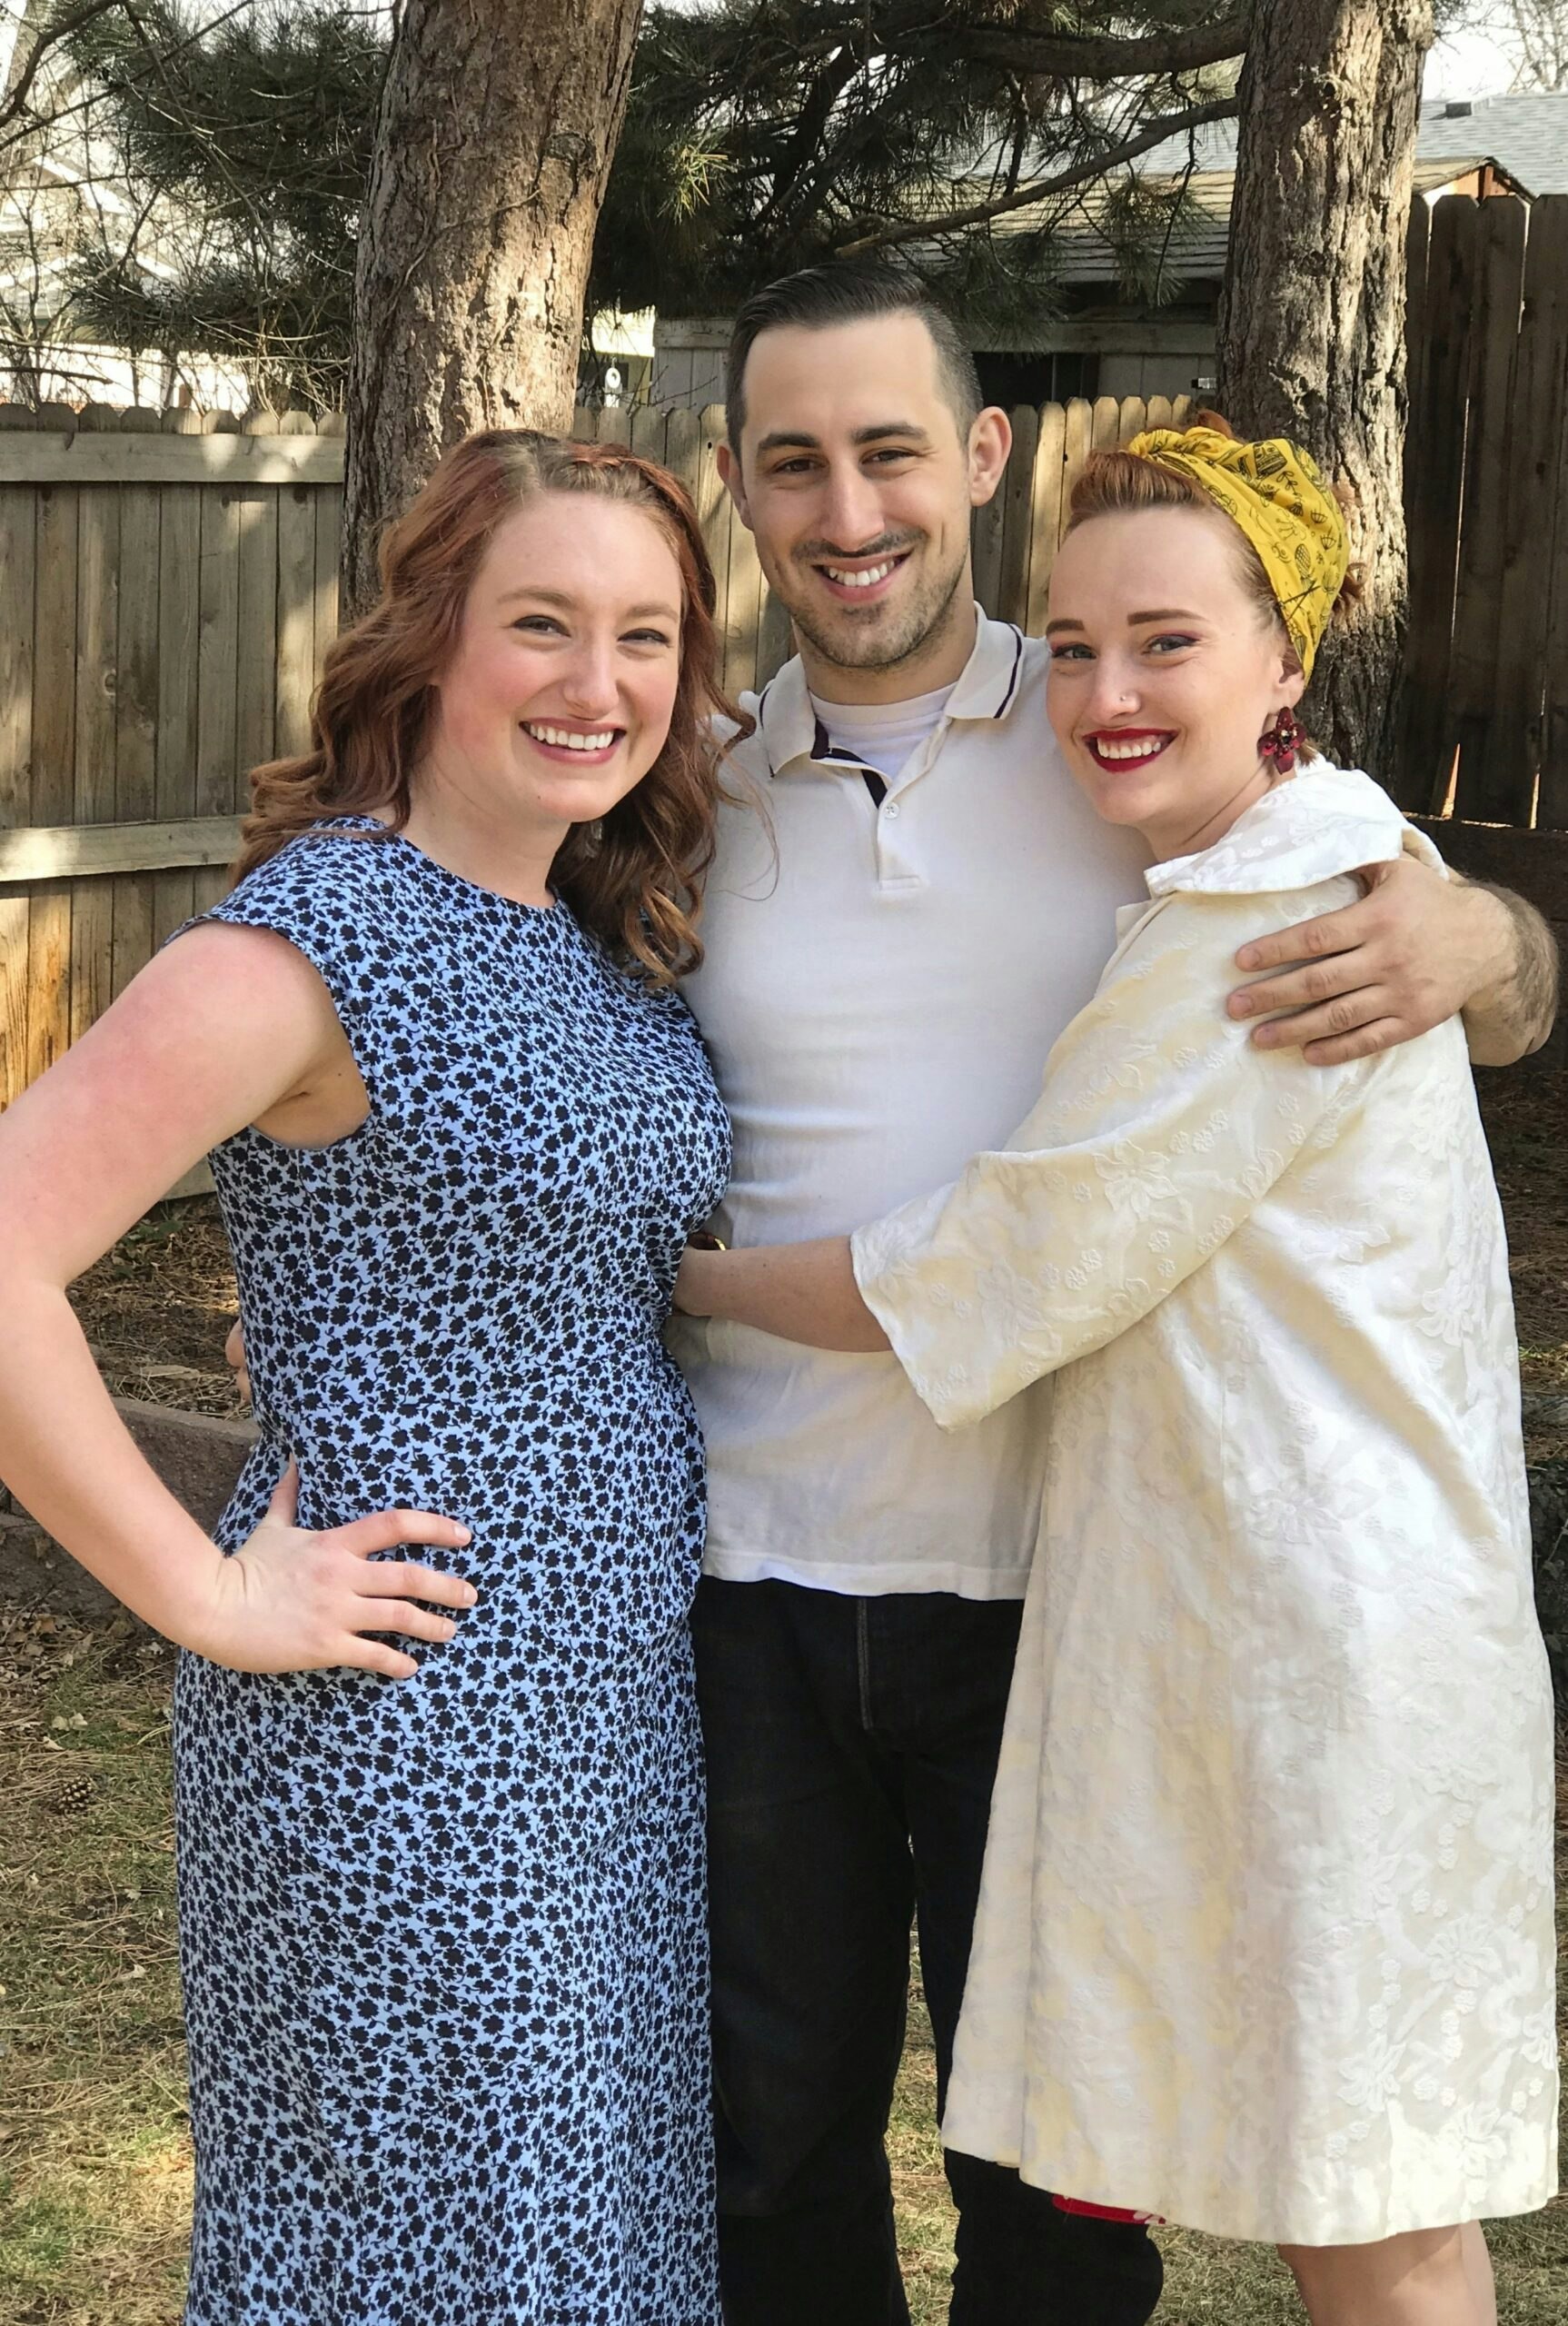 Two brides, one groom